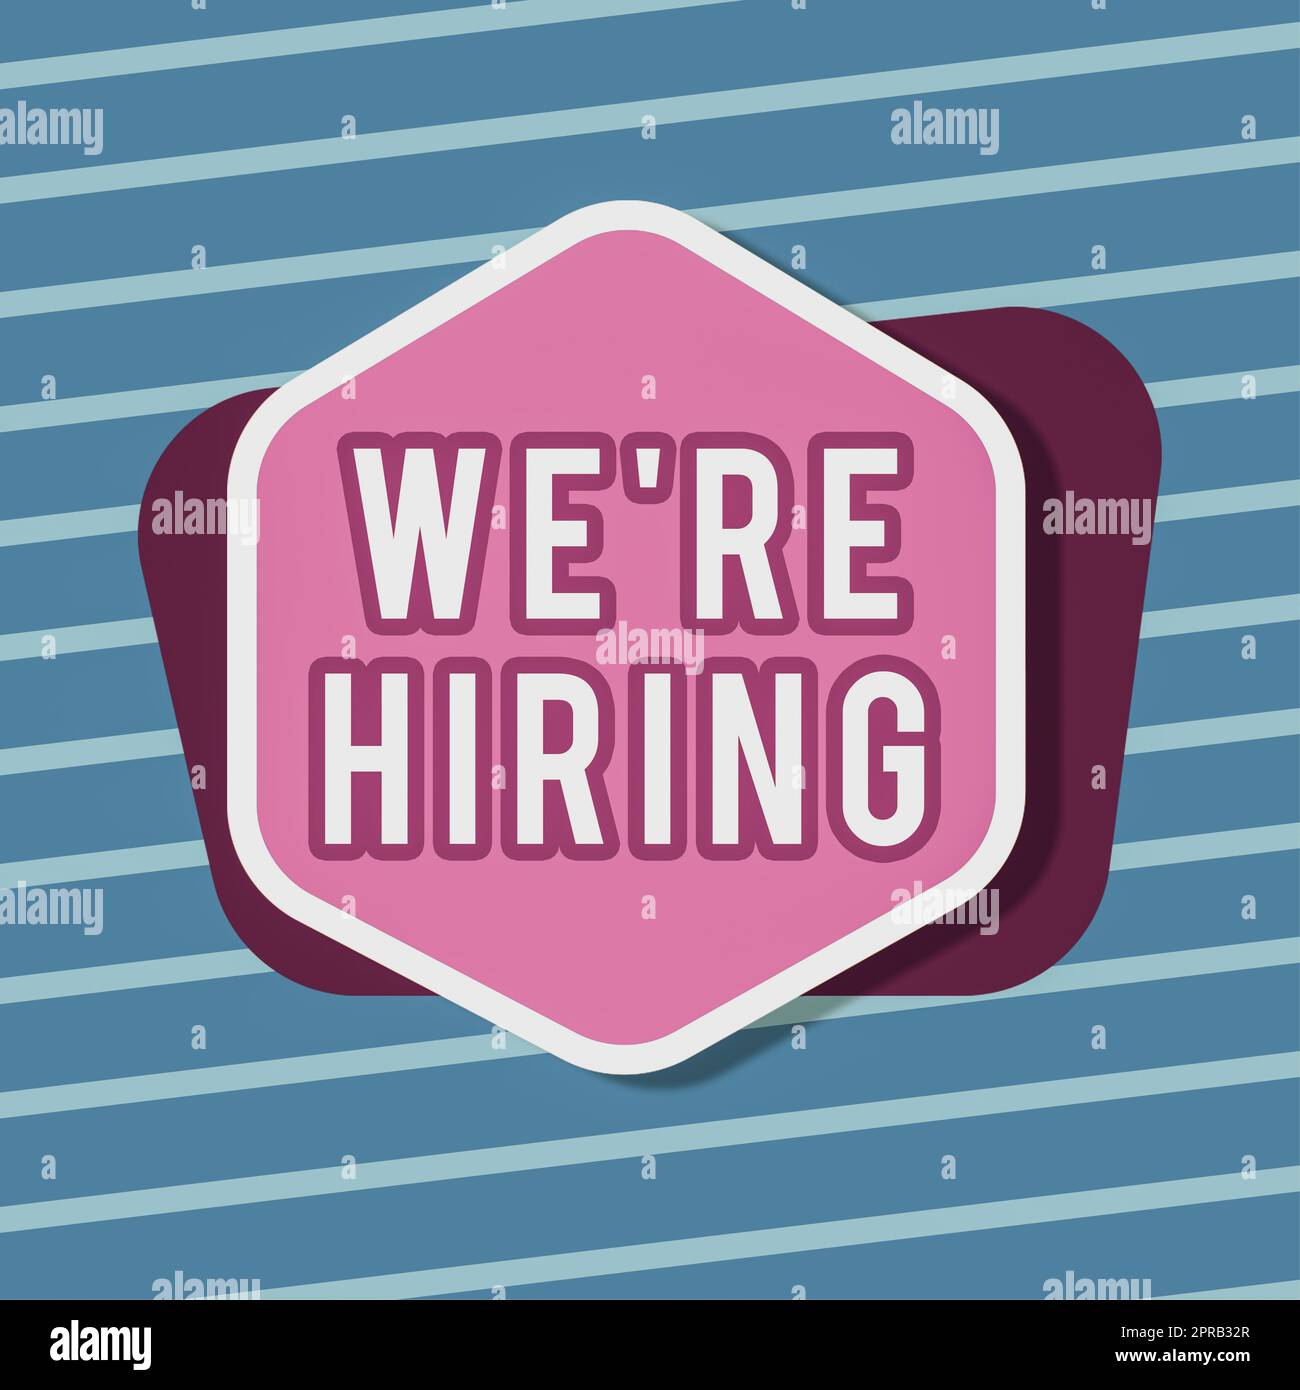 Text sign showing We Re Are Hiring. Concept meaning Advertising Employment Workforce Placement New Job Blank Hexagon And Rectangular Shapes For Promotion Of Business. Stock Photo